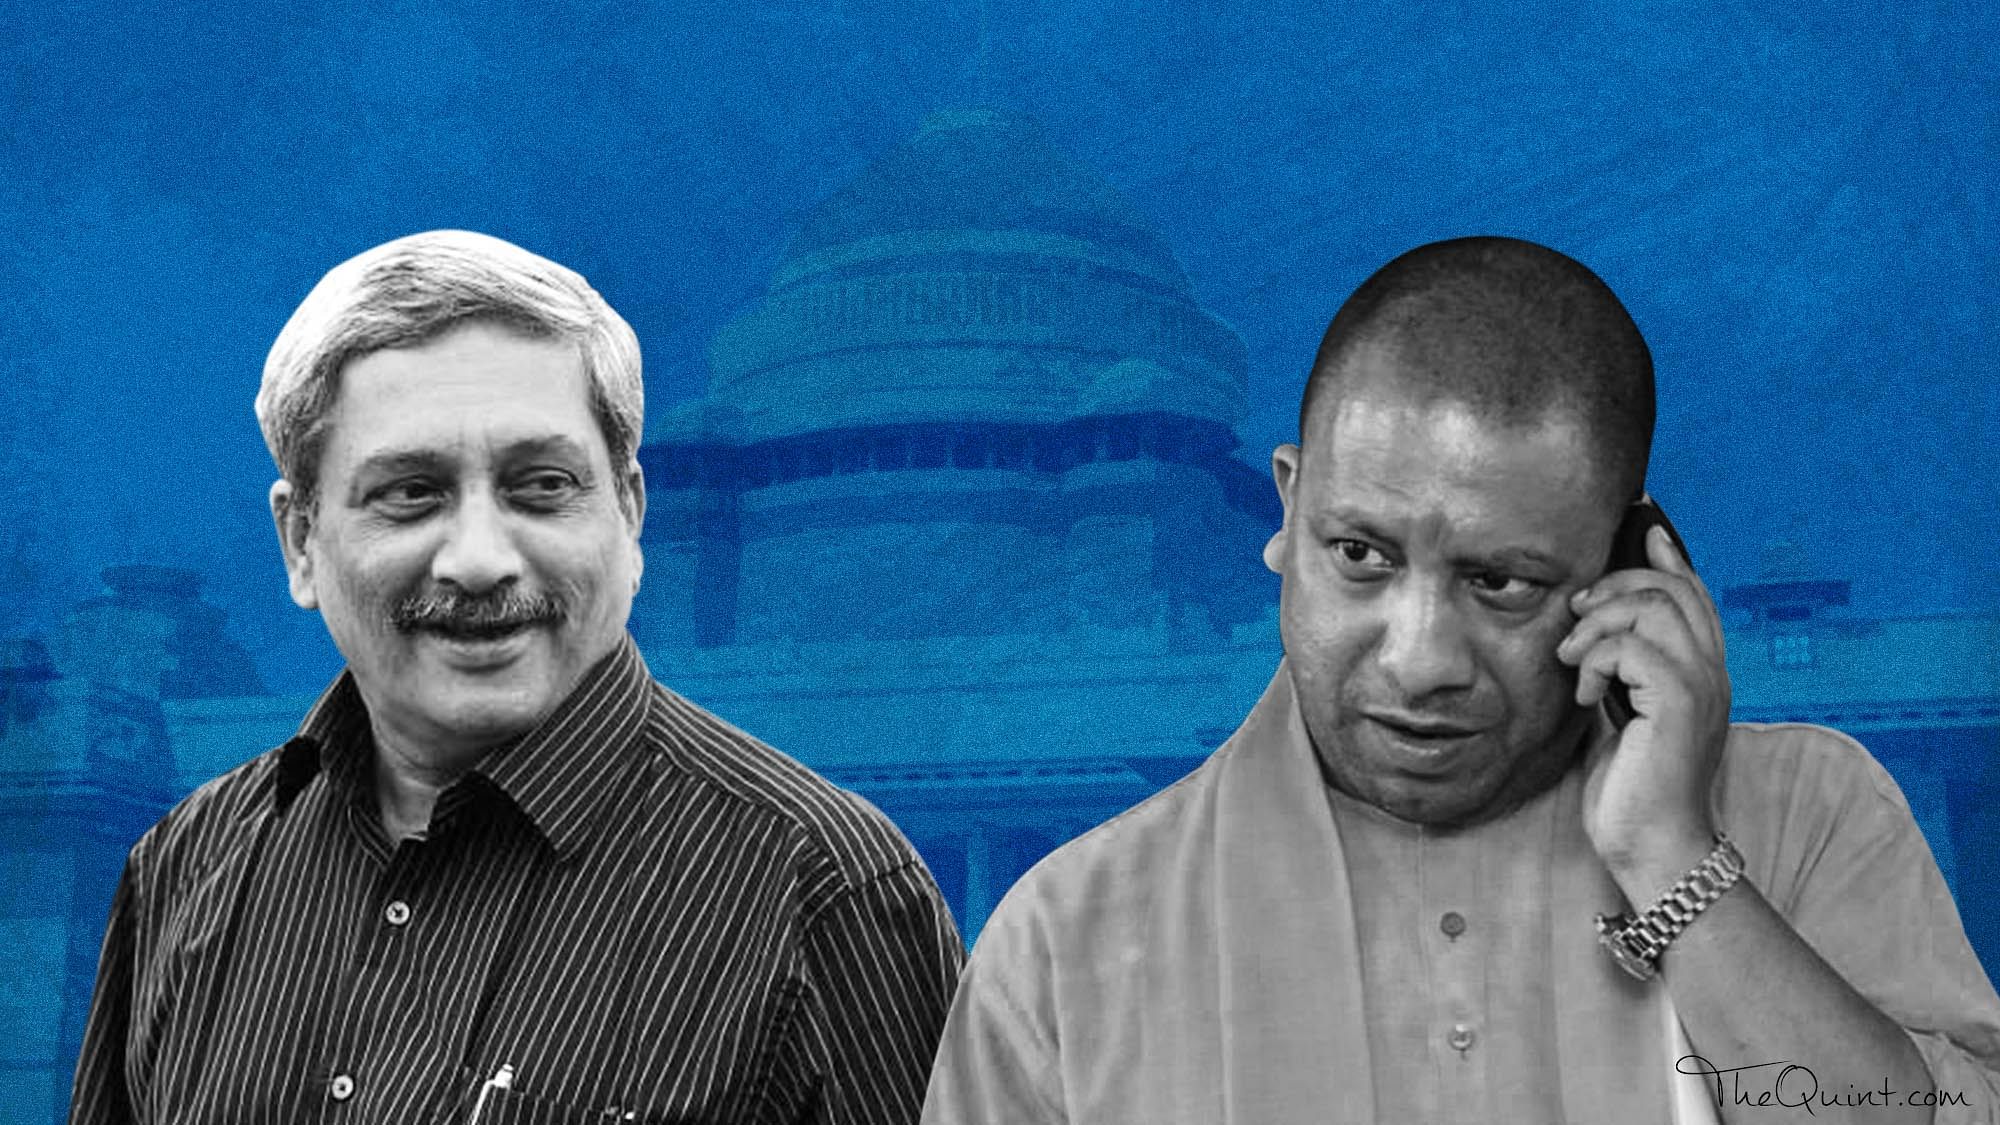 Manohar Parrikar and Yogi Adityanath have not resigned as MPs in the four months since swearing in as Chief Minister of Goa and UP, respectively.